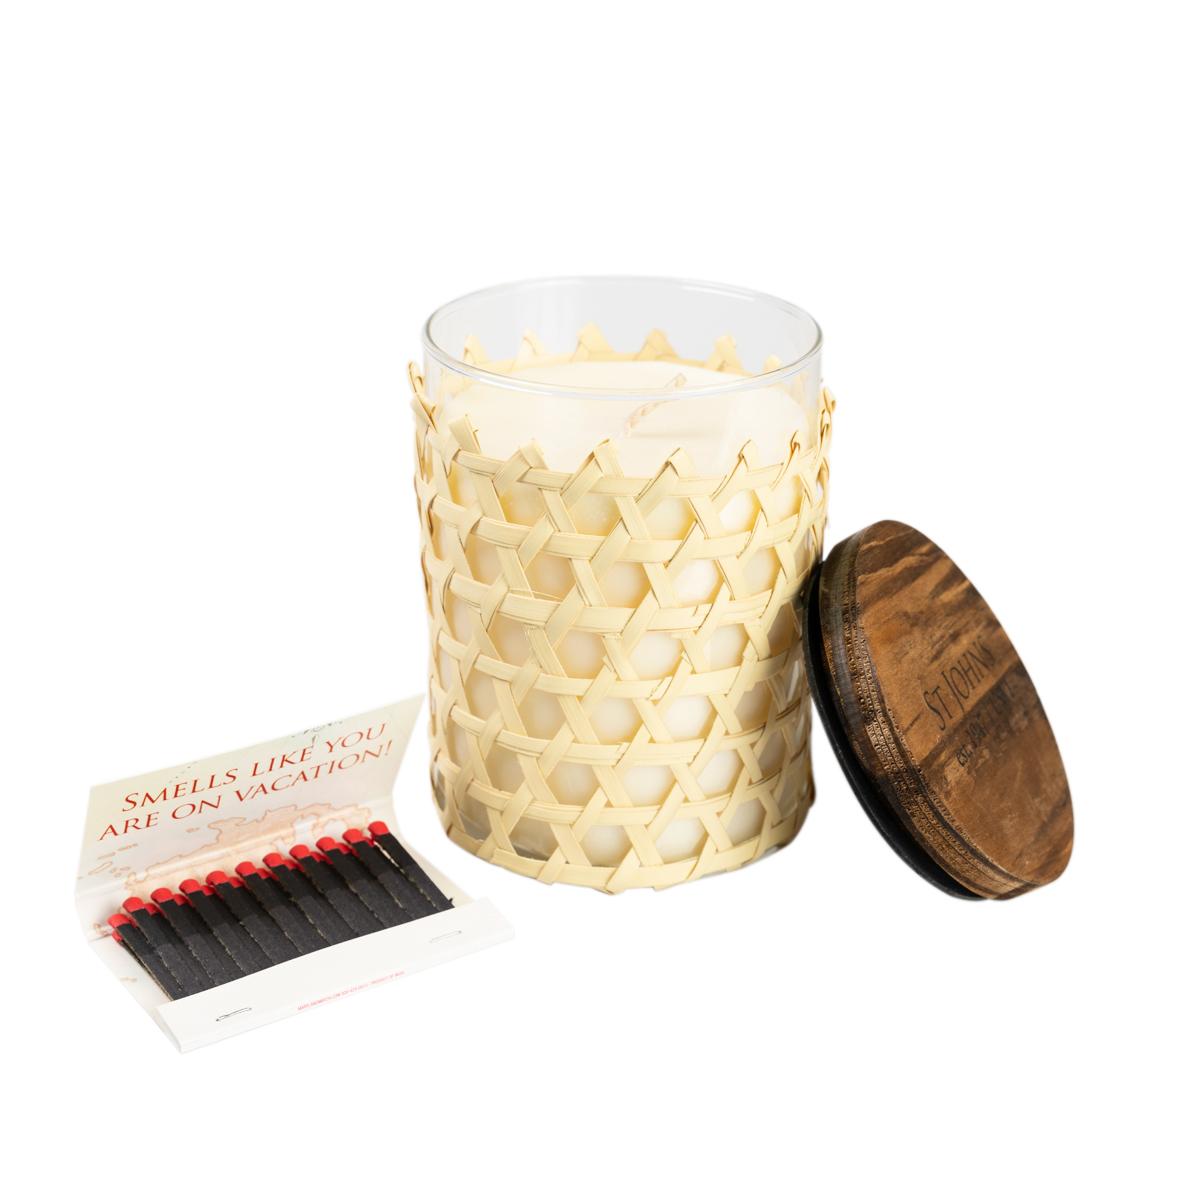 Primary image of Bay Rum Soy Wax Candle